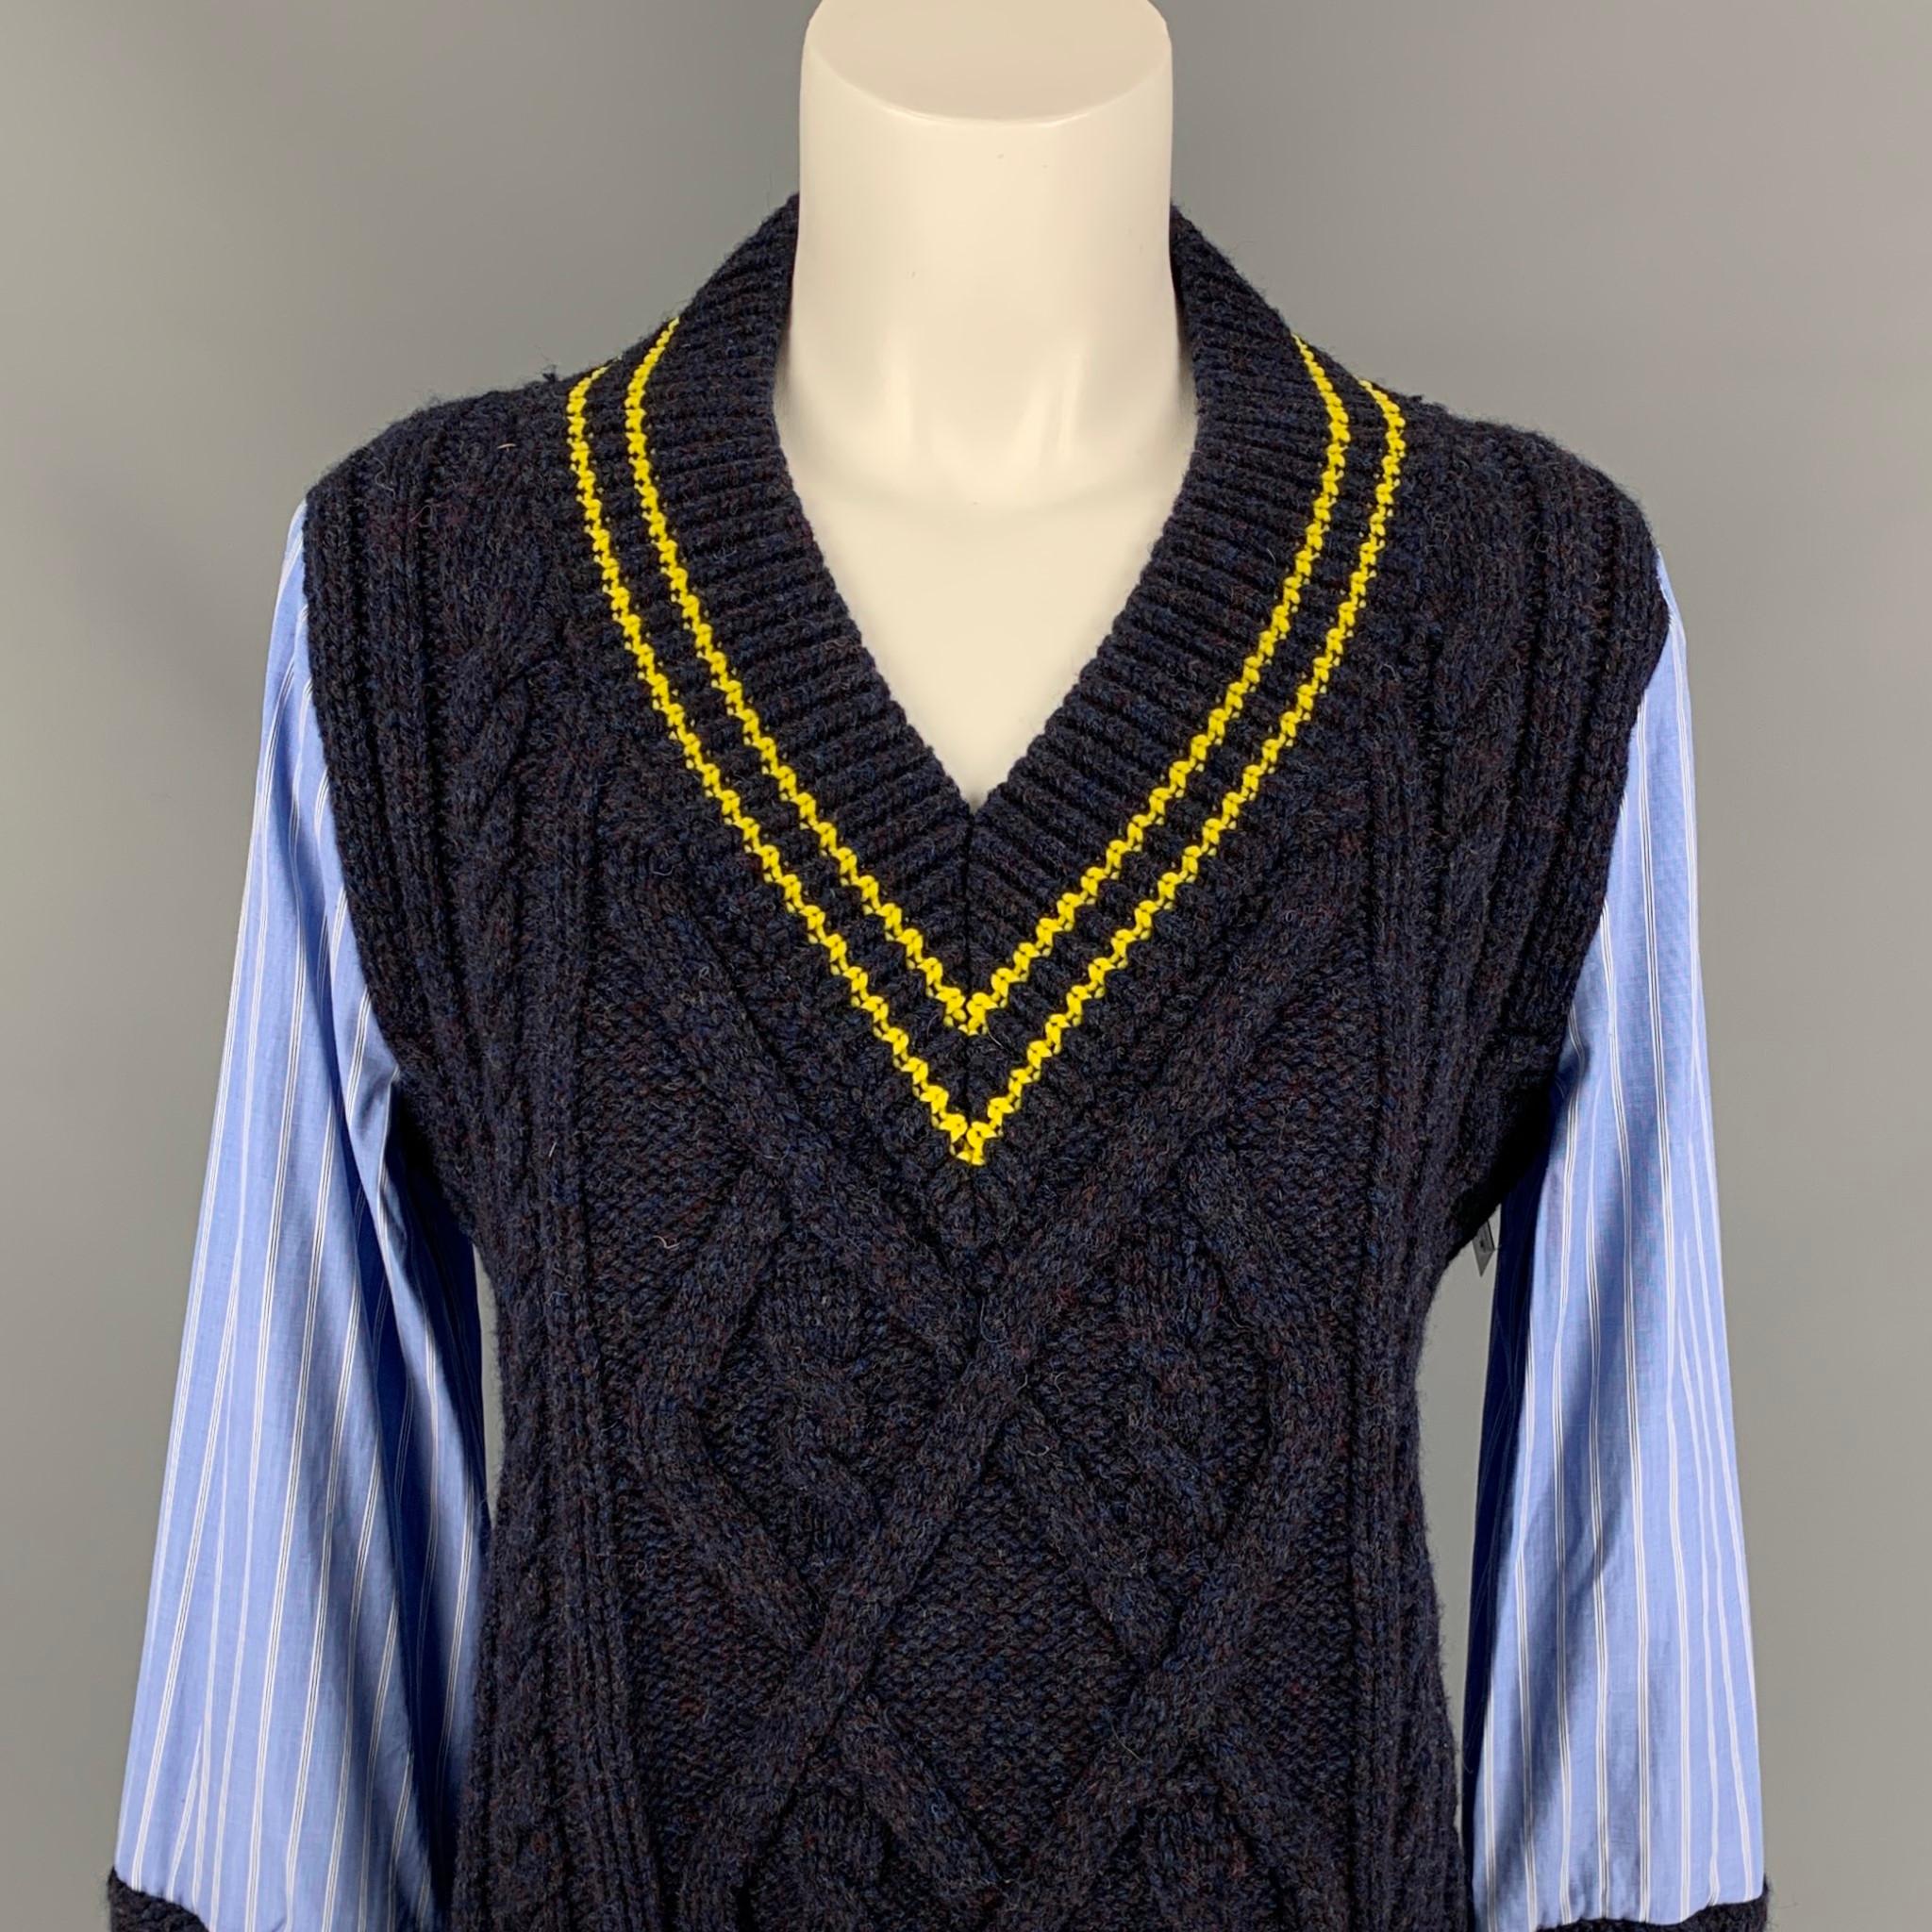 MAISON MARGIELA pullover comes in a blue & navy wool with stripe cotton sleeves & back featuring a yellow trim and a v-neck. Made in Italy. 

Excellent Pre-Owned Condition.
Marked: 40
Original Retail Price: $1,254.00

Measurements:

Shoulder: 16